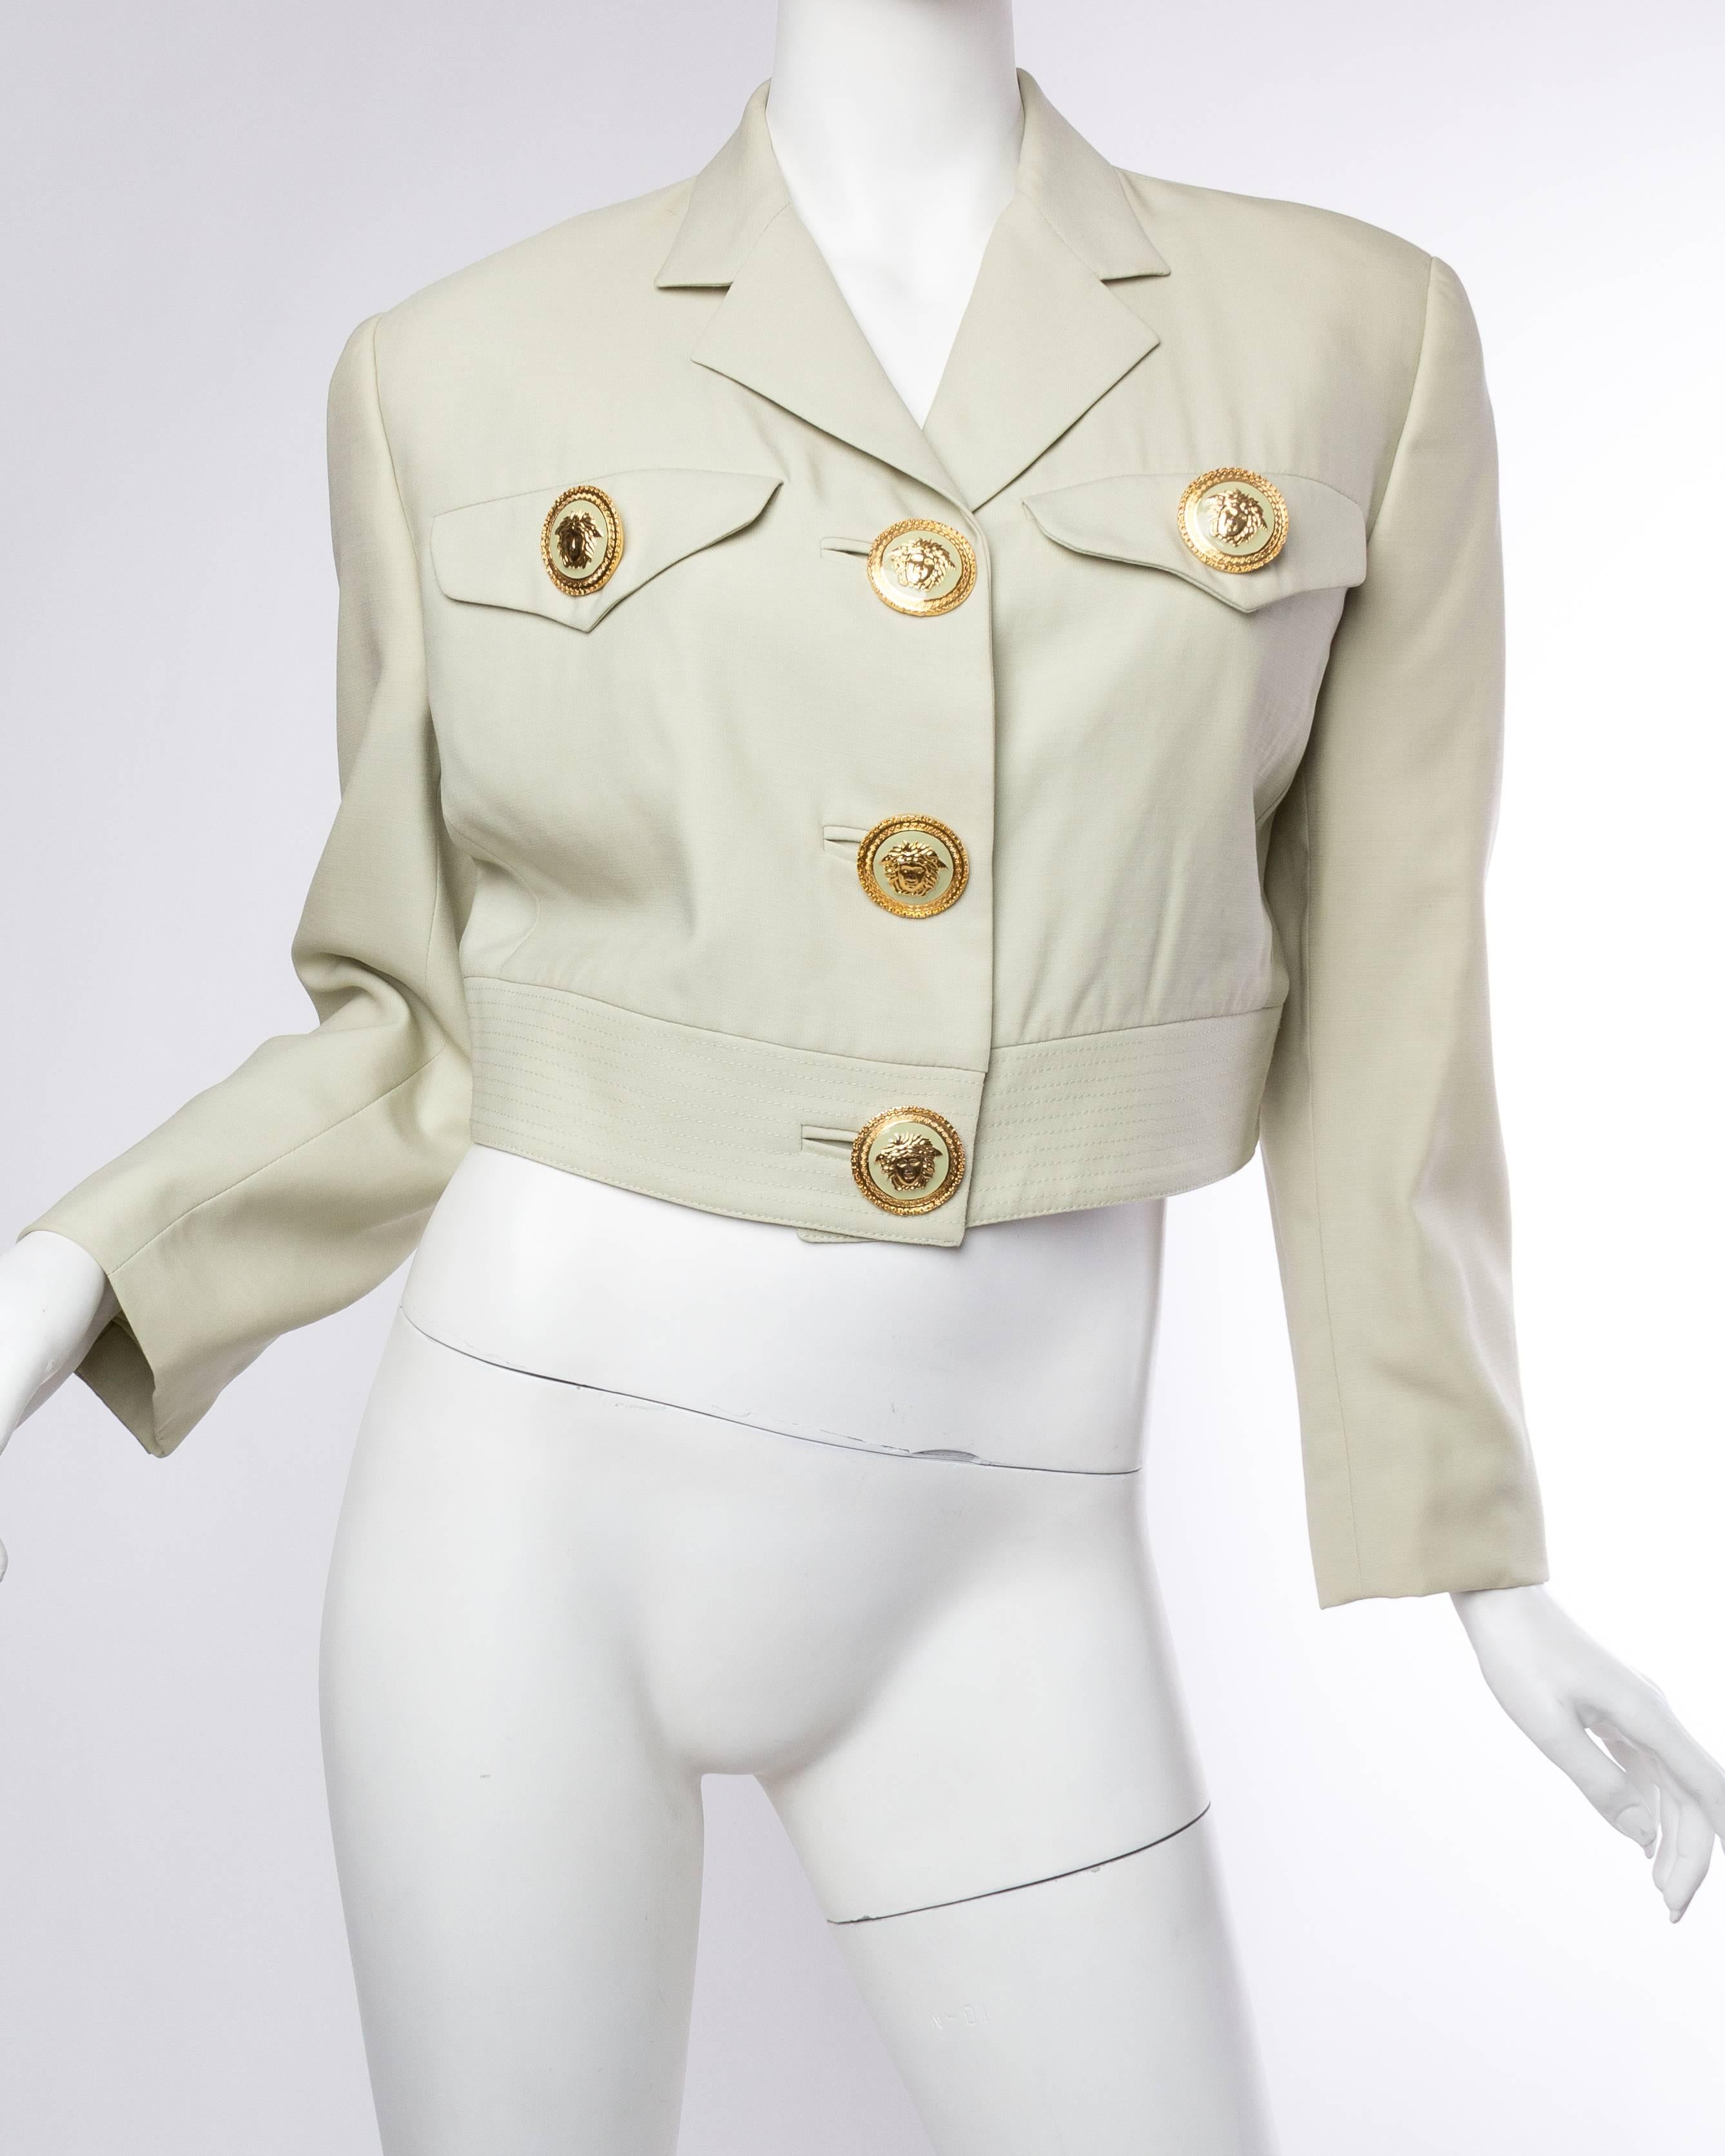 Dating from the early 1990s this pastel jacket, originally sold at Bergdorf Goodman, is adorned with large fantastic Medusa buttons. 